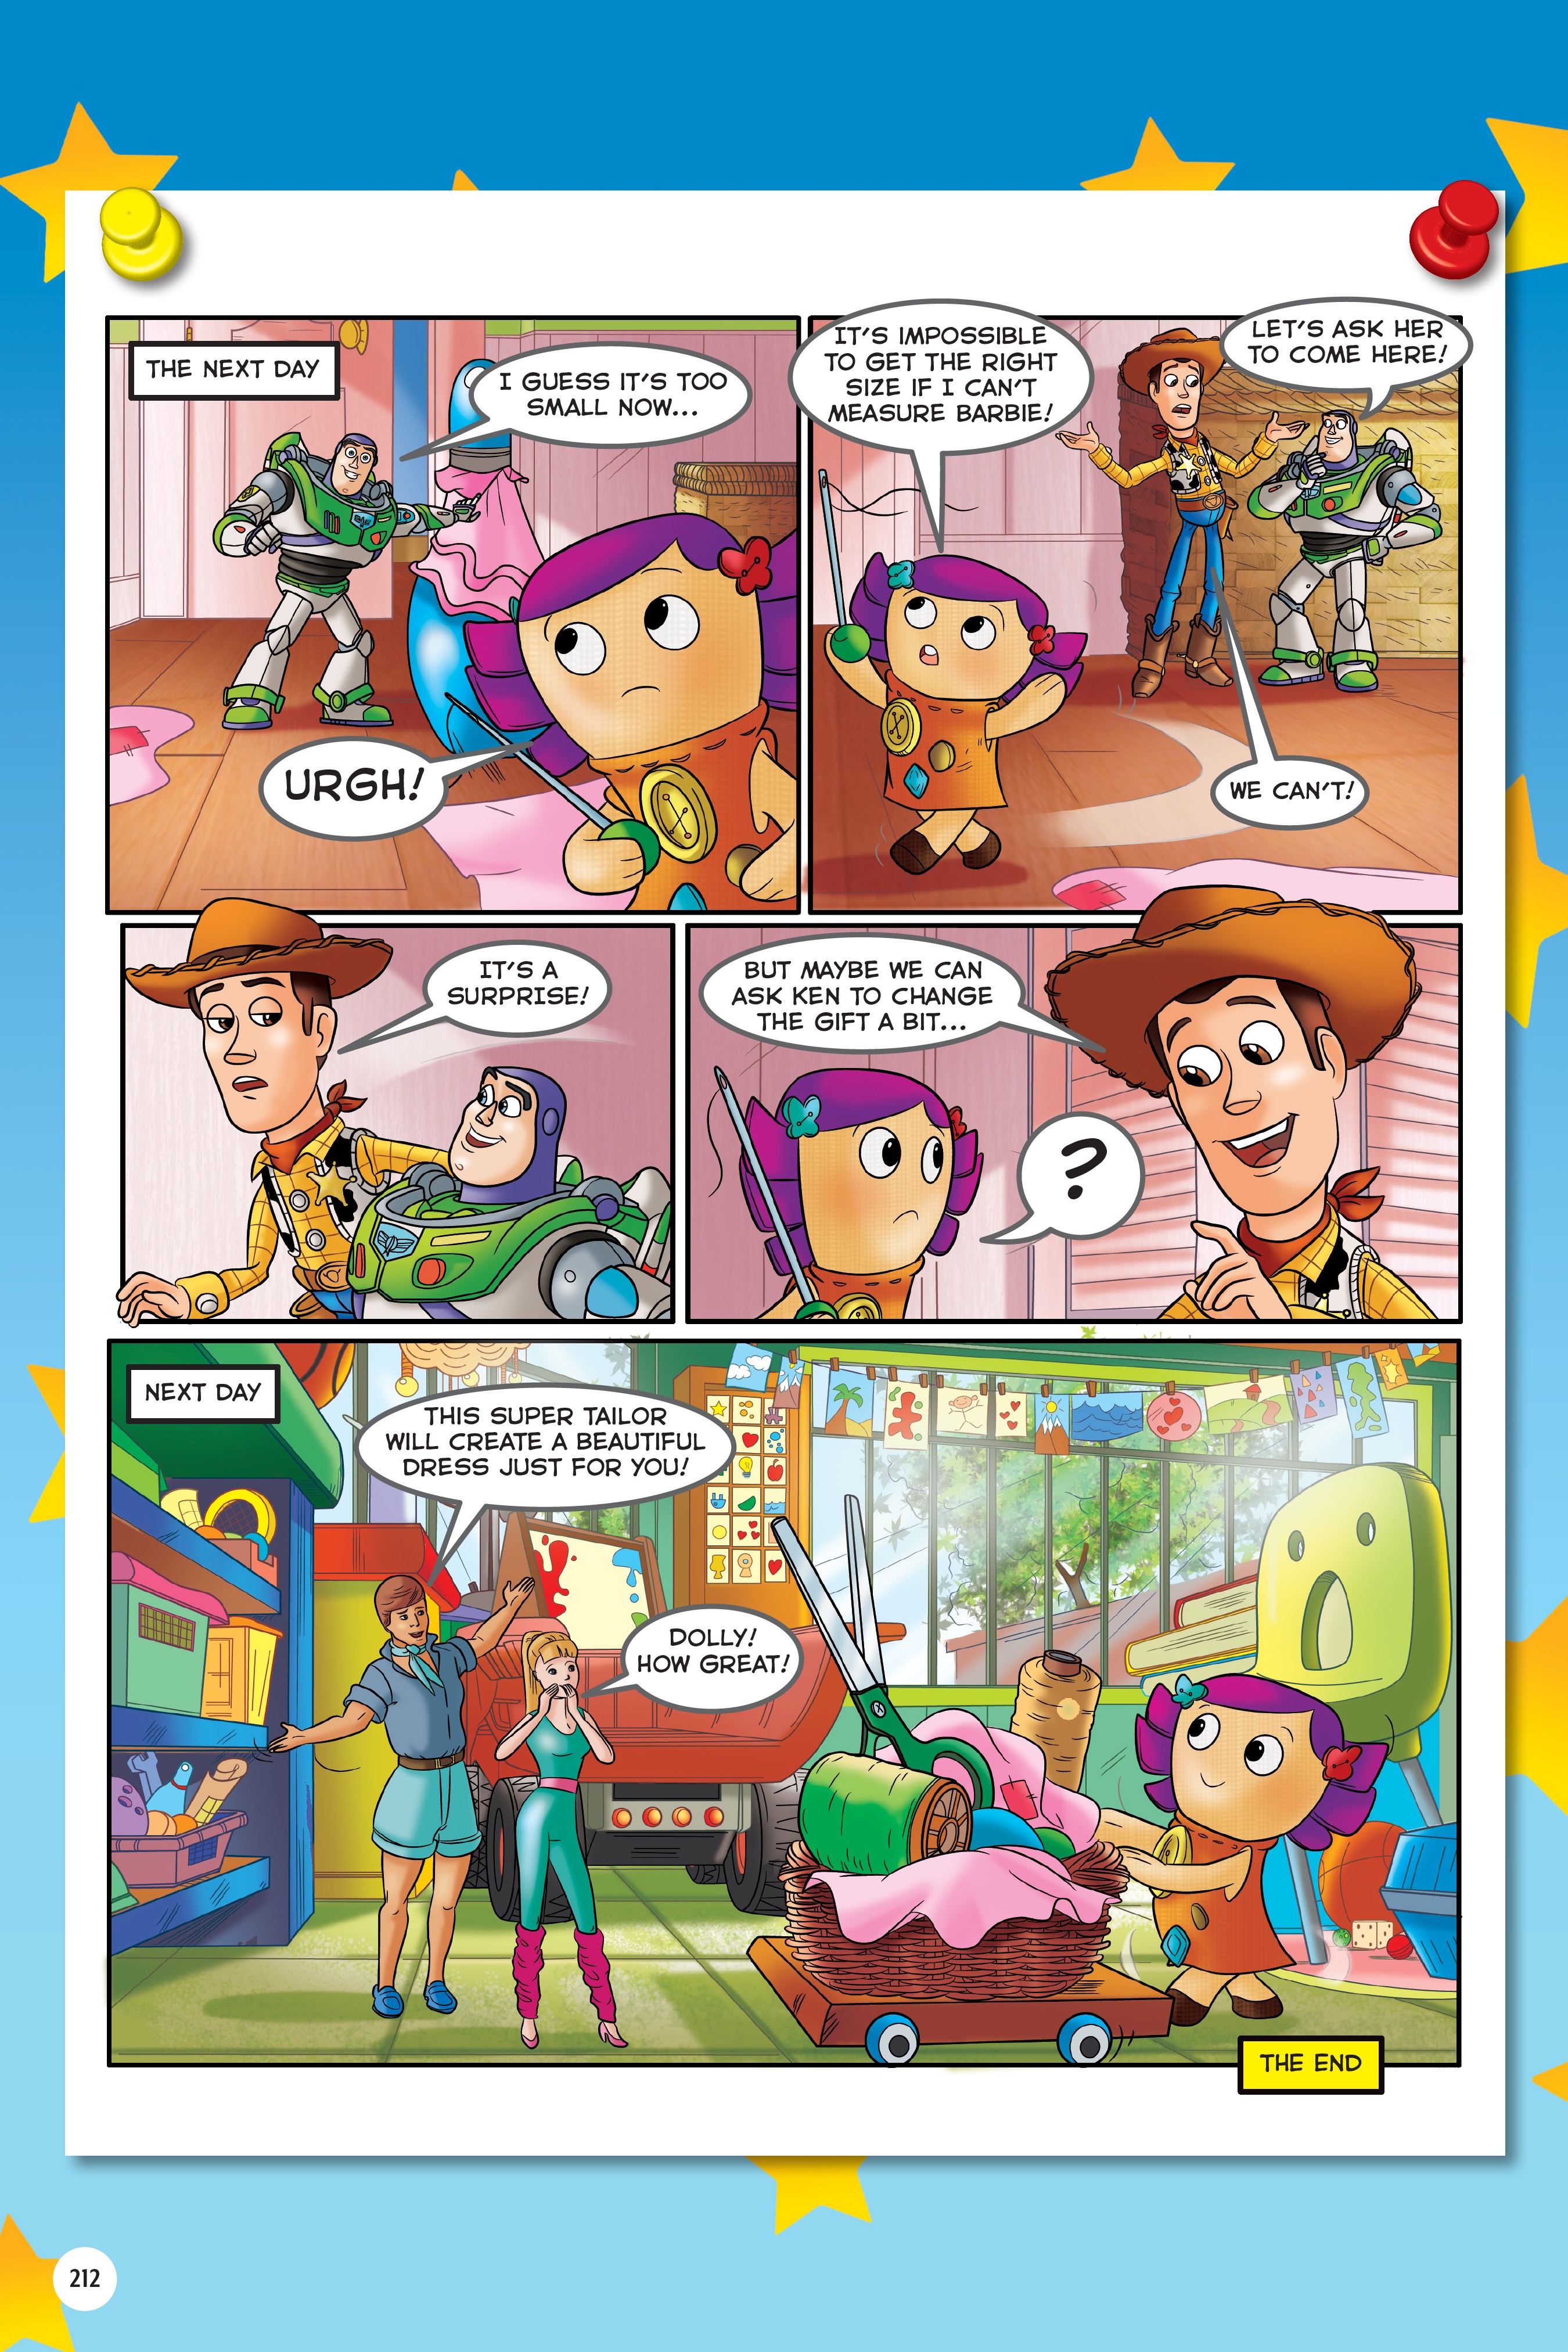 Toy Story 3 - Disney Pixar Toy Story Adventures Tpb 1 Part 3 | Read Disney Pixar Toy Story  Adventures Tpb 1 Part 3 comic online in high quality. Read Full Comic  online for free -